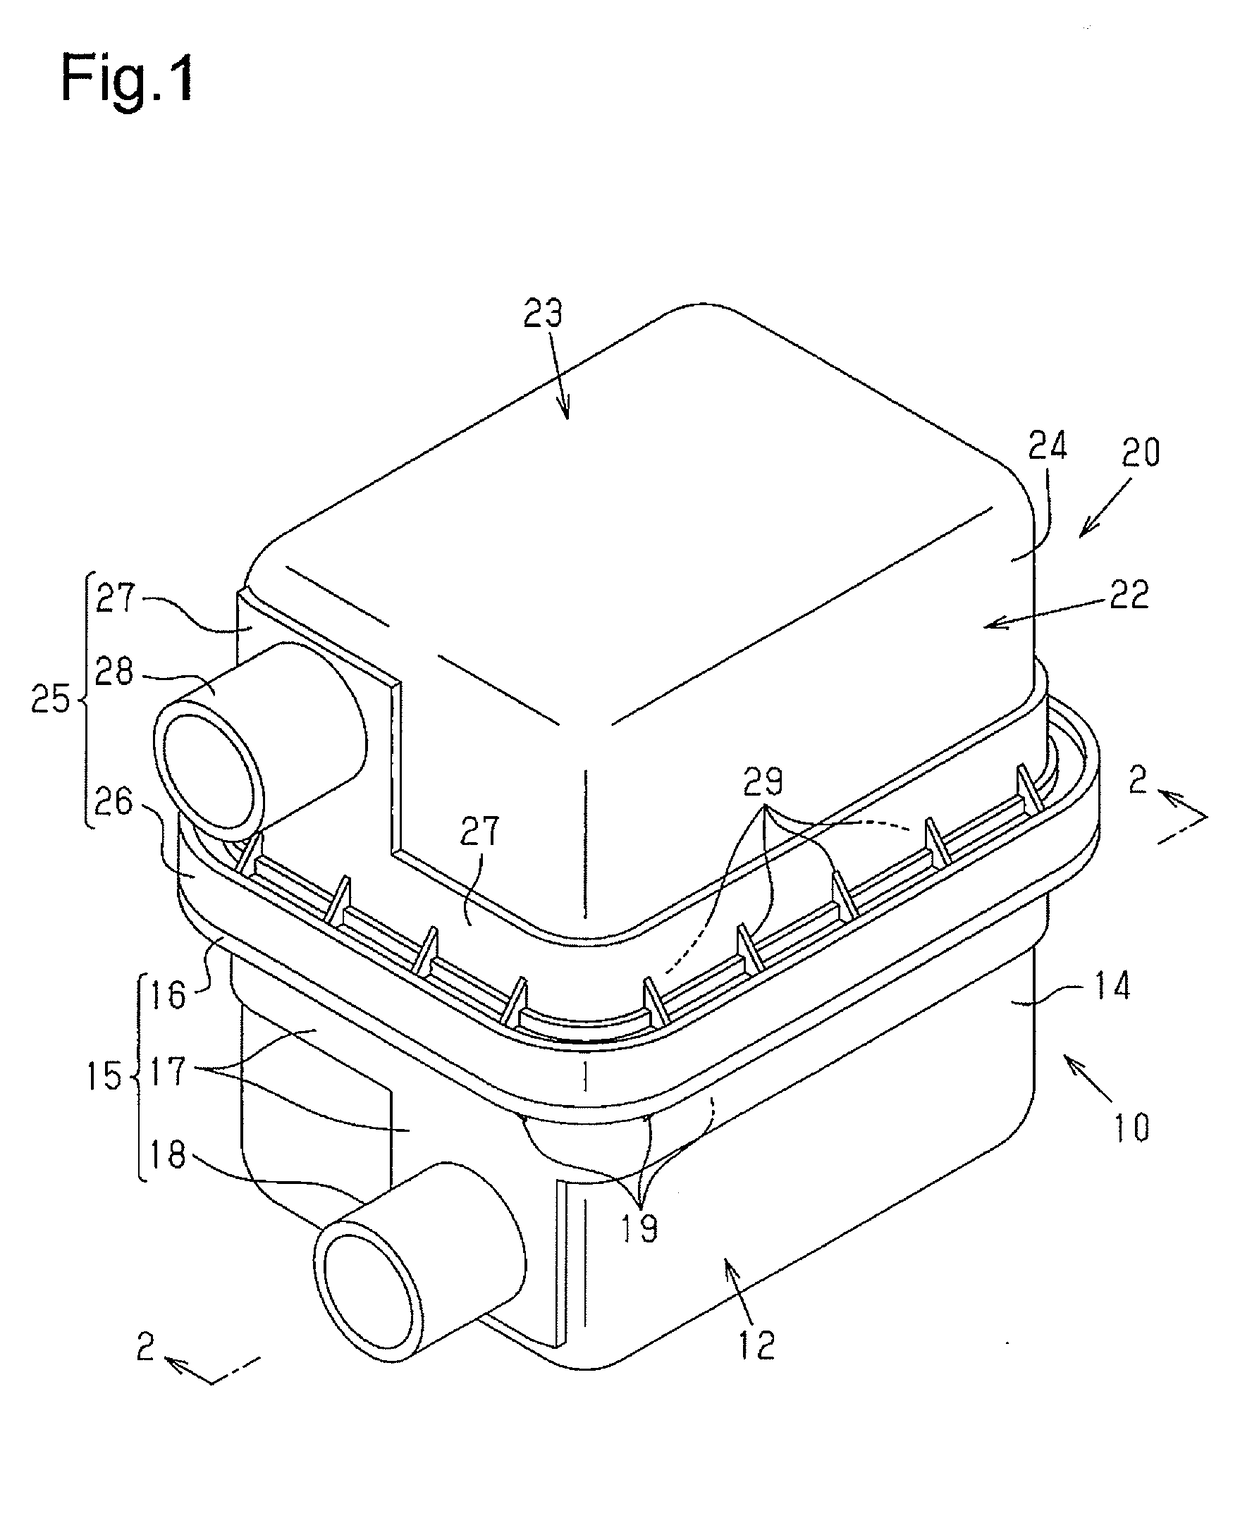 Air cleaner for internal combustion engine